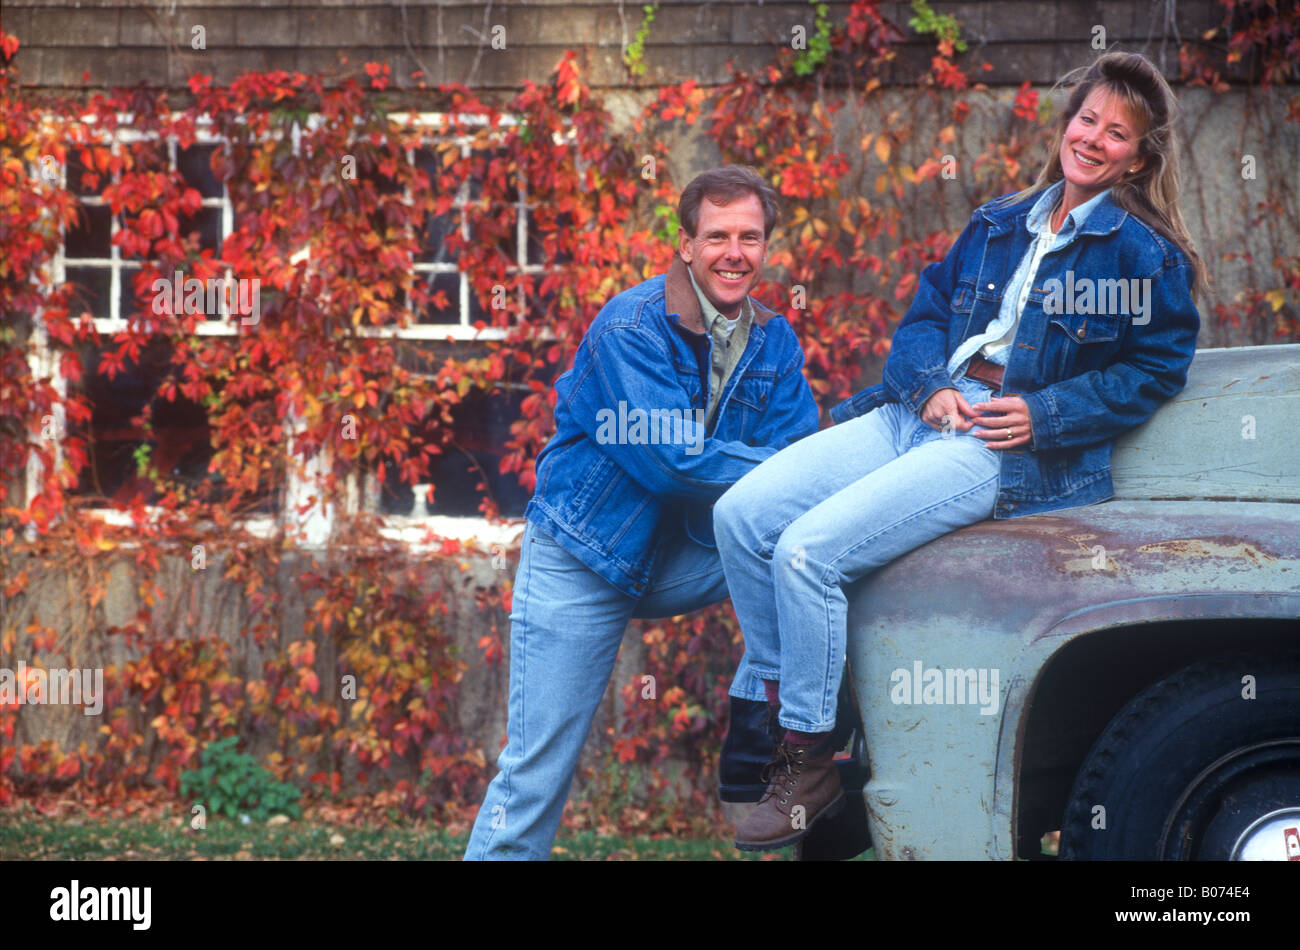 A smiling man and woman their 30s or early 40s wearing blue denim attire enjoys an old grey pickup truck in autumn weather. Stock Photo